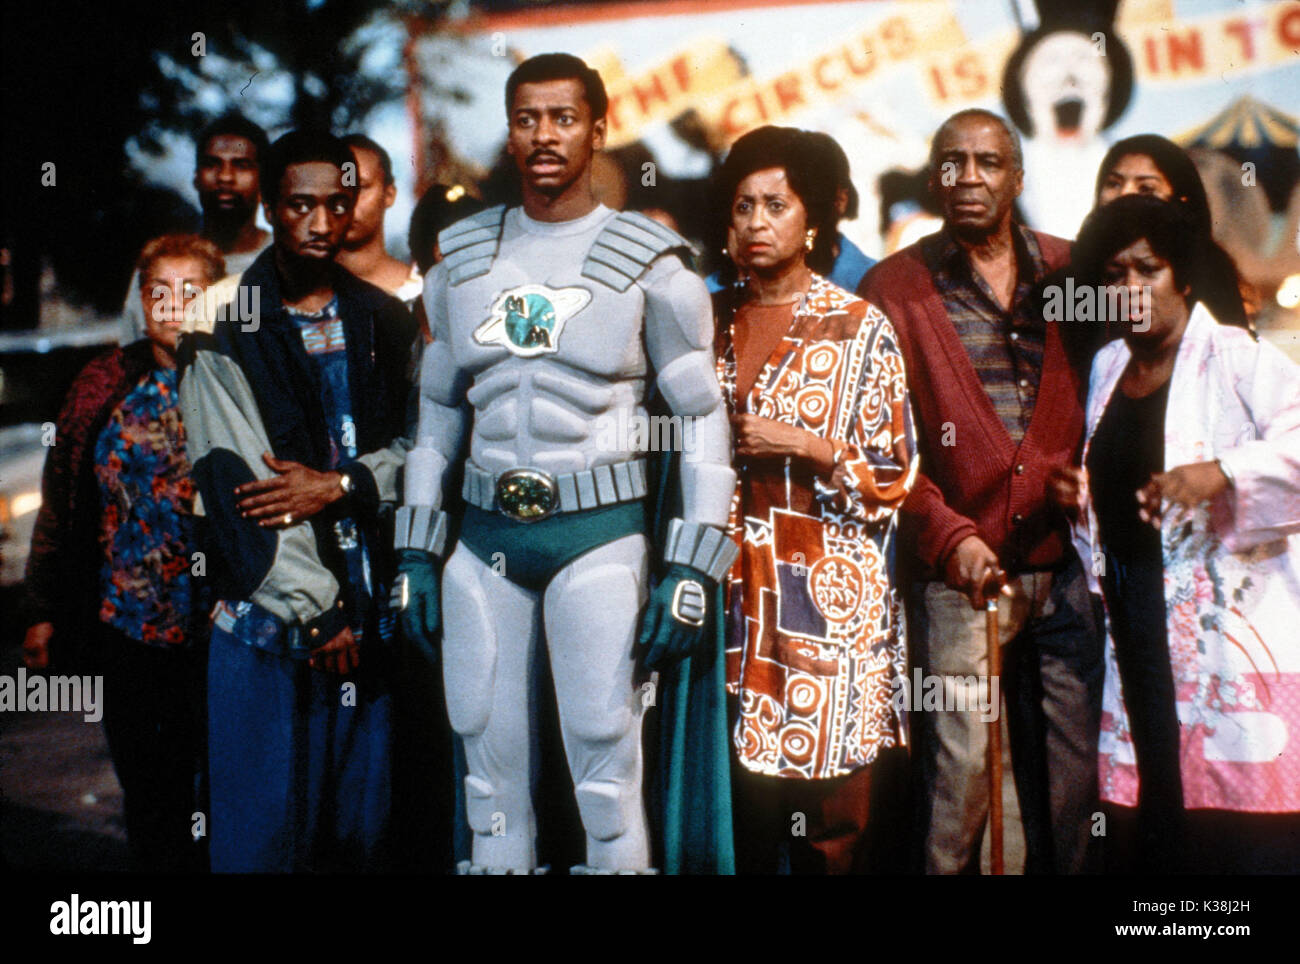 THE METEOR MAN ROBERT TOWNSEND as Meteor Man, with left to right: EDDIE GRIFFIN, MARLA GIBBS, ROBERT GUILLAUME, MARILYN COLEMAN     Date: 1993 Stock Photo